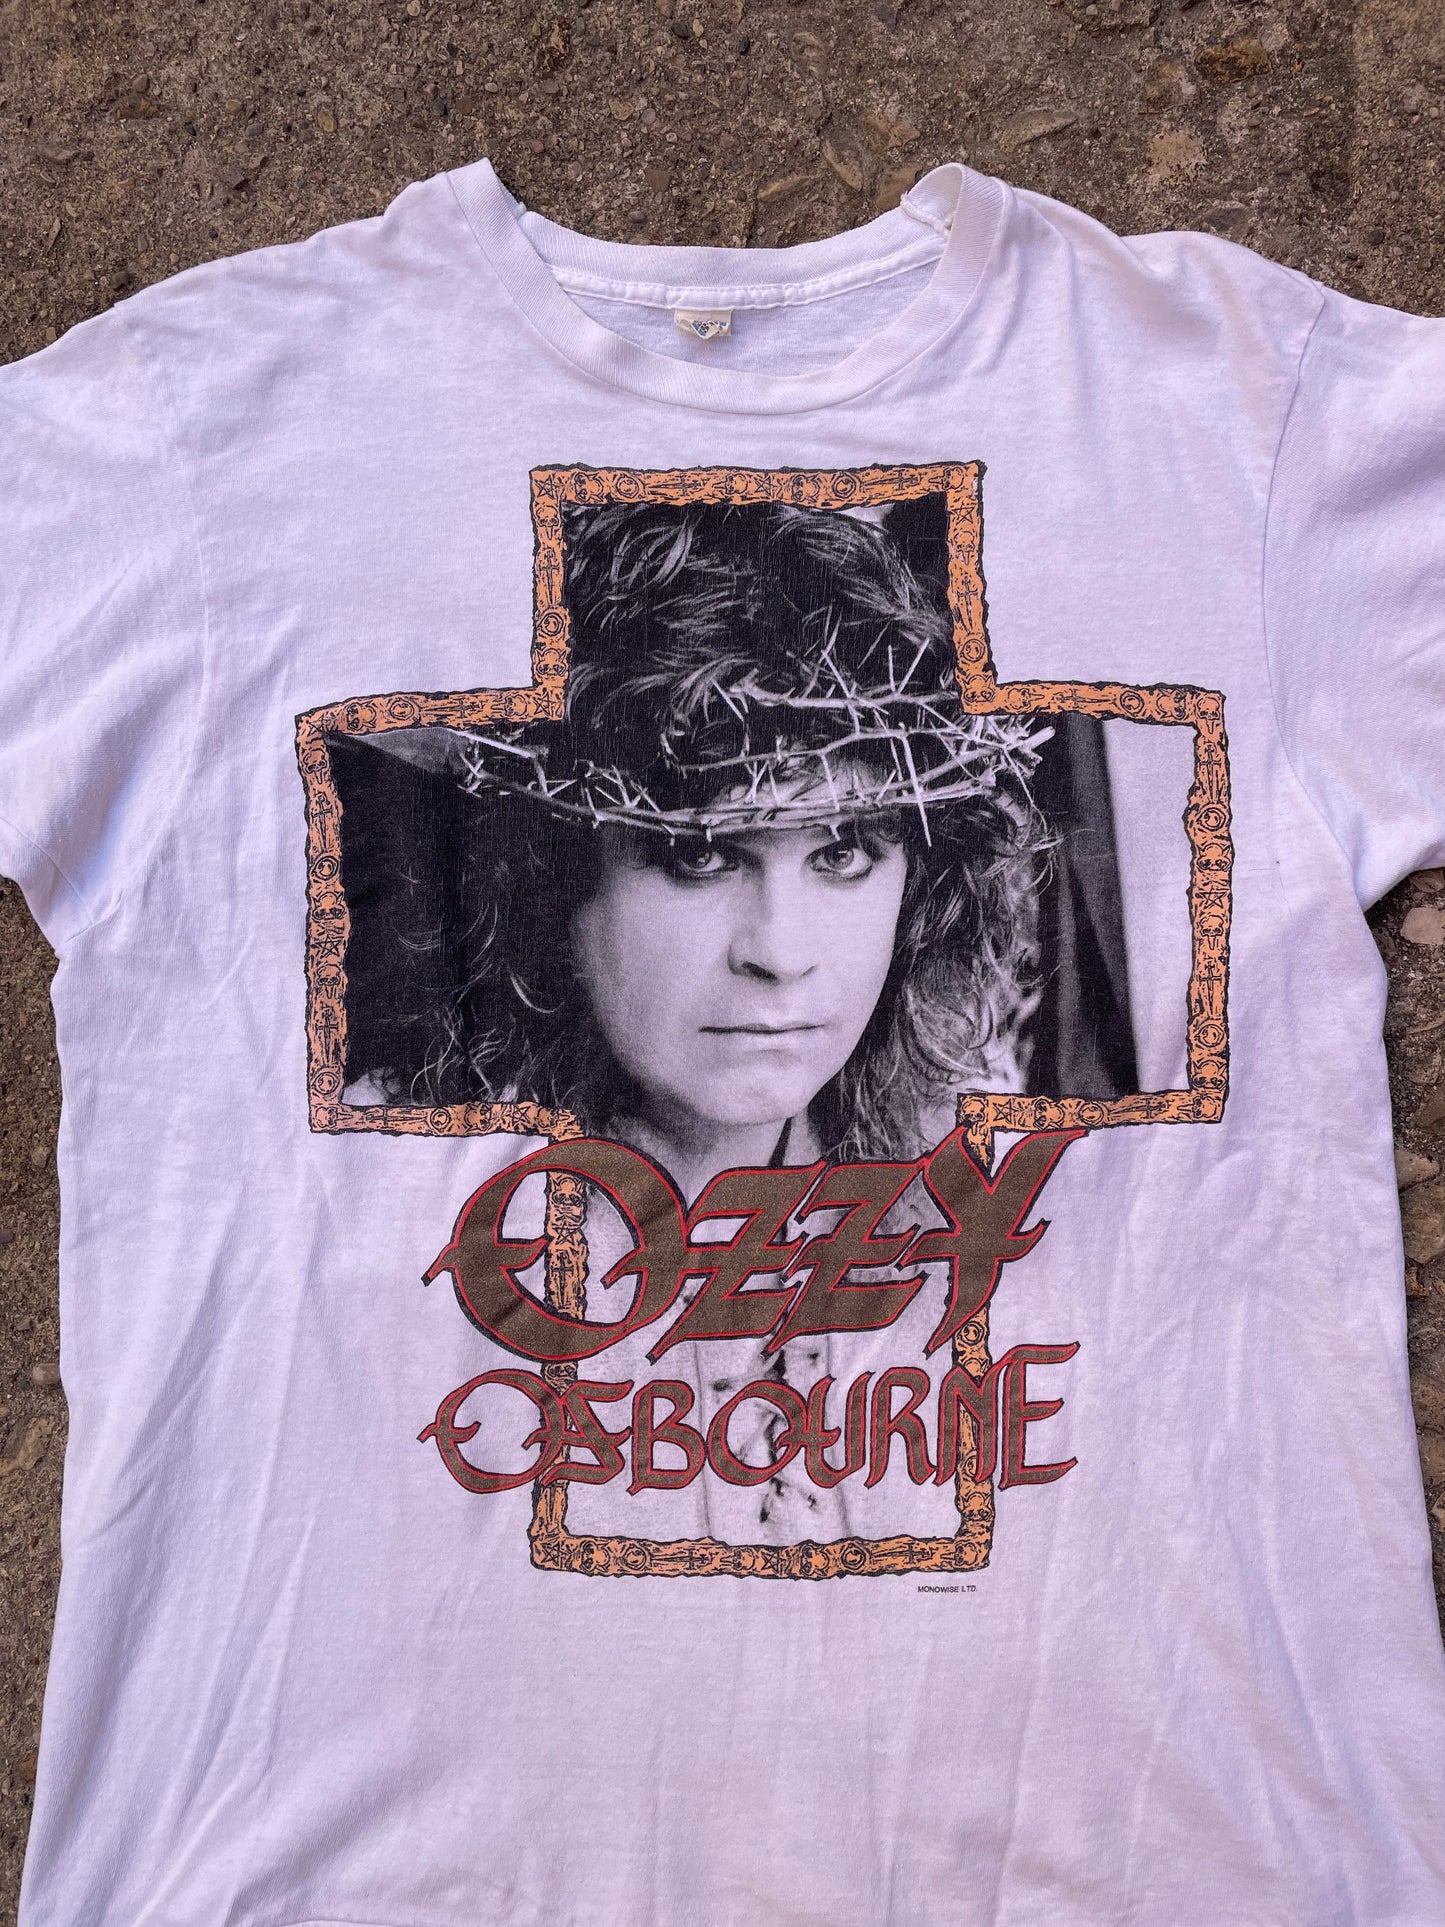 1988/1989 Ozzy Osbourne 'No Rest For The Wicked' Tour Band T-Shirt - L